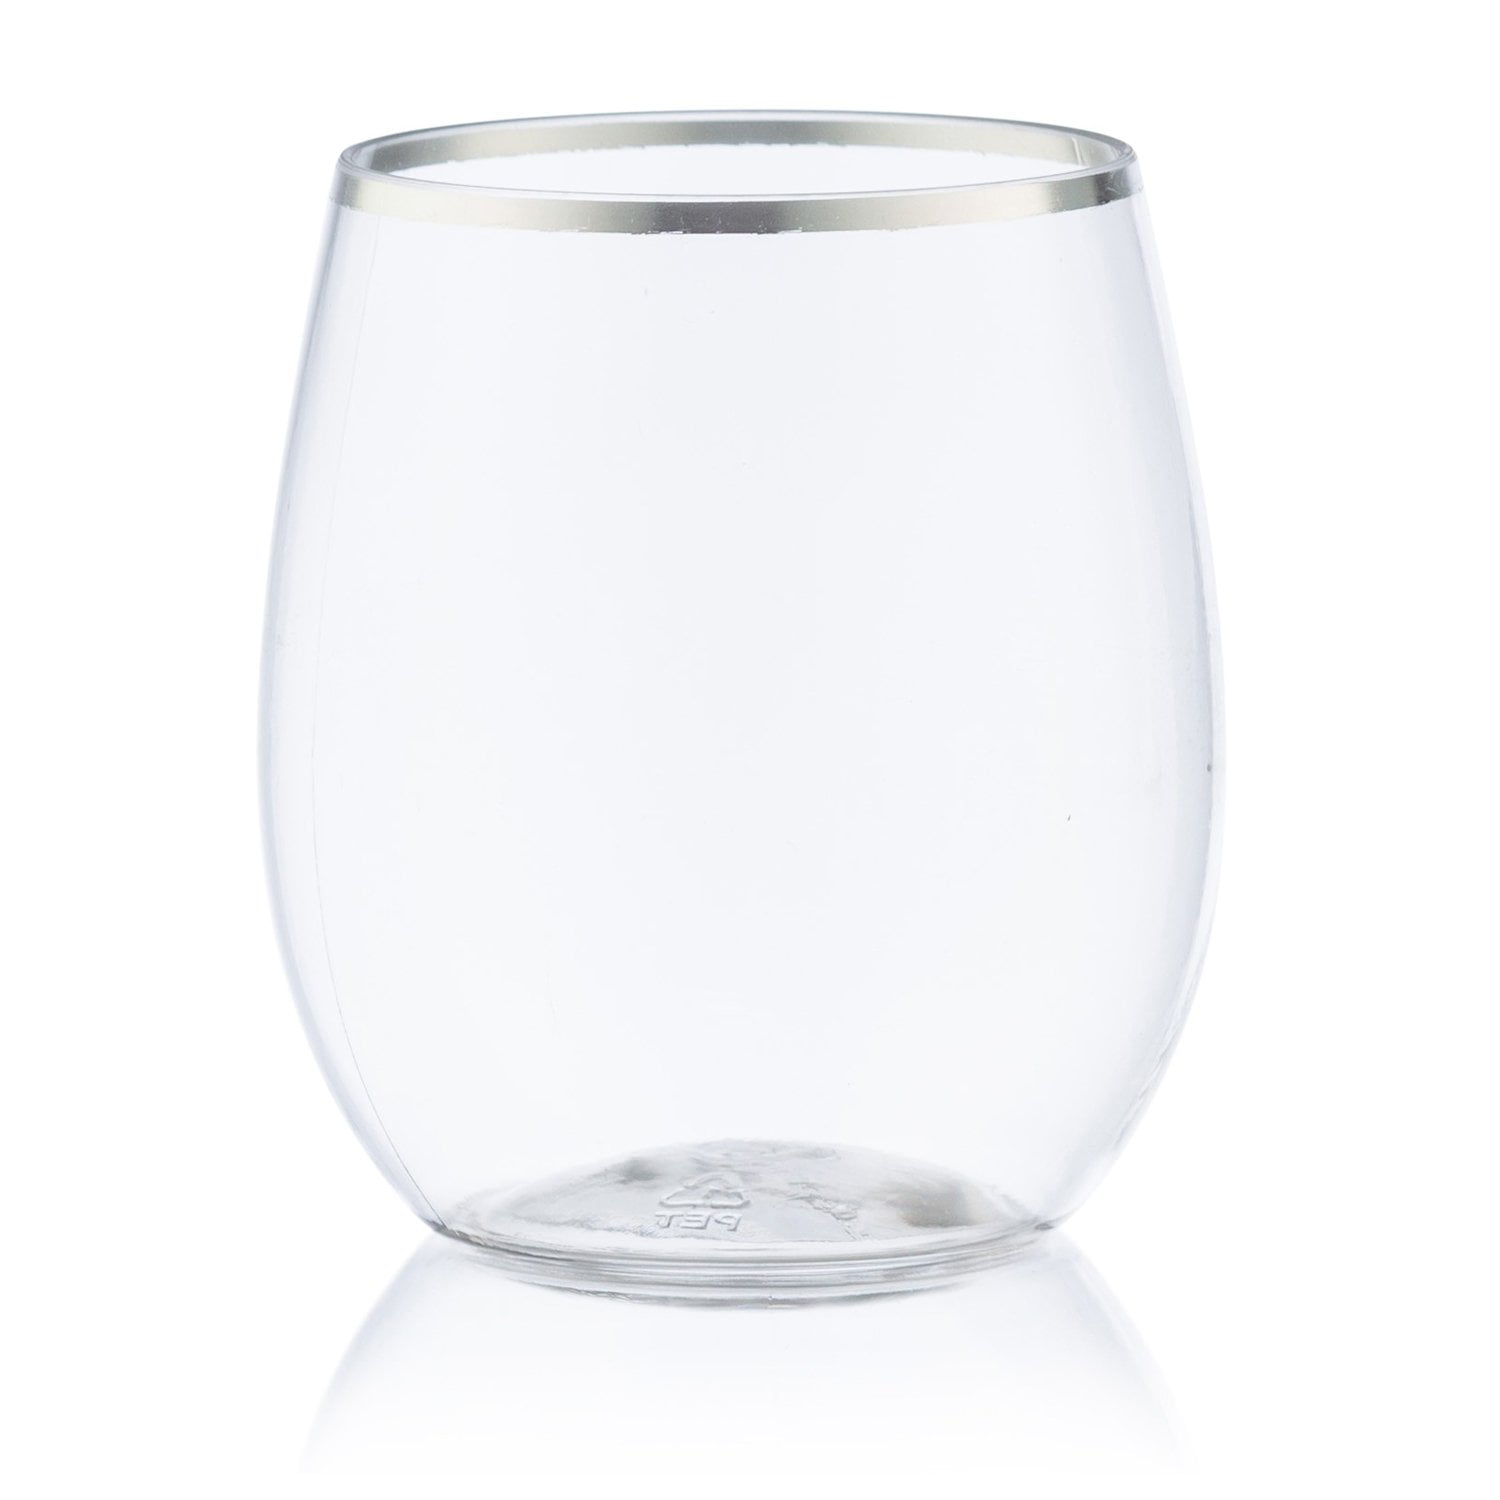 Faceted Silver & Glass Stemless Wine Glasses, Set of 4 — ZENGENIUS